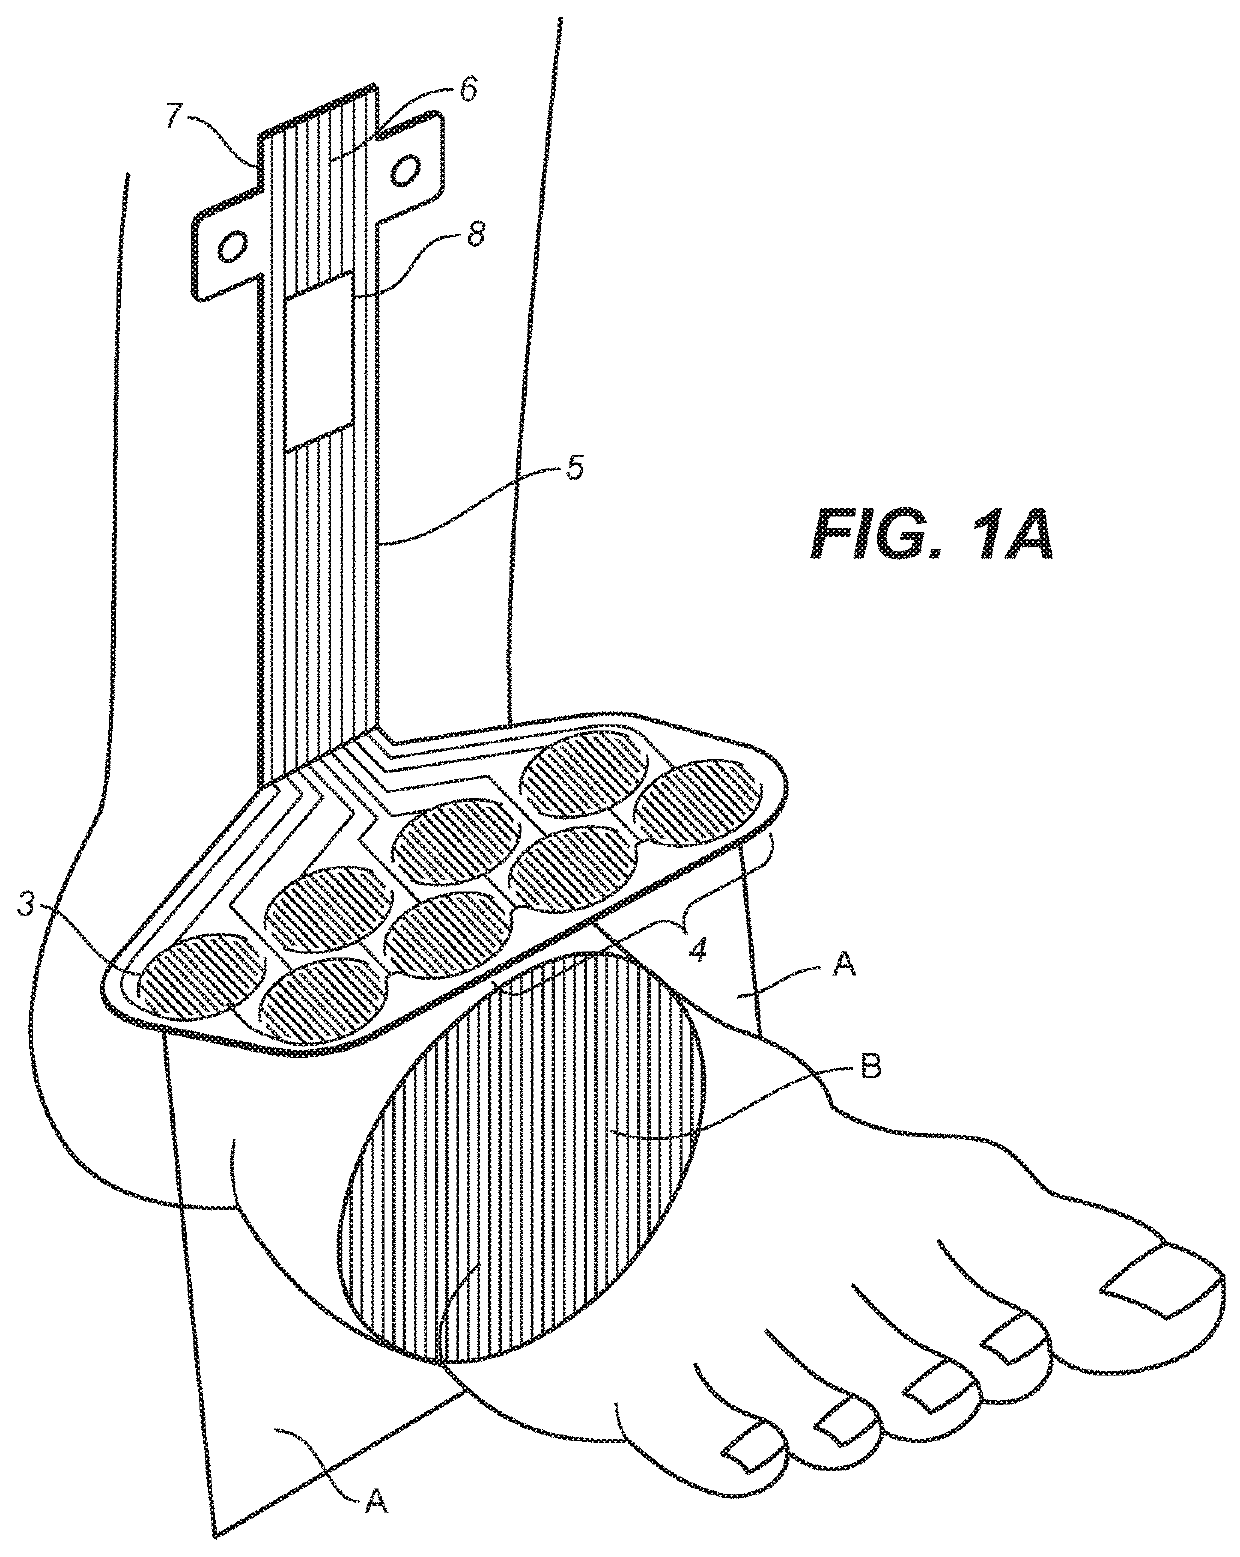 Wearable footwear sensor arrays for detection of cardiac events, body motion, and muscular actions